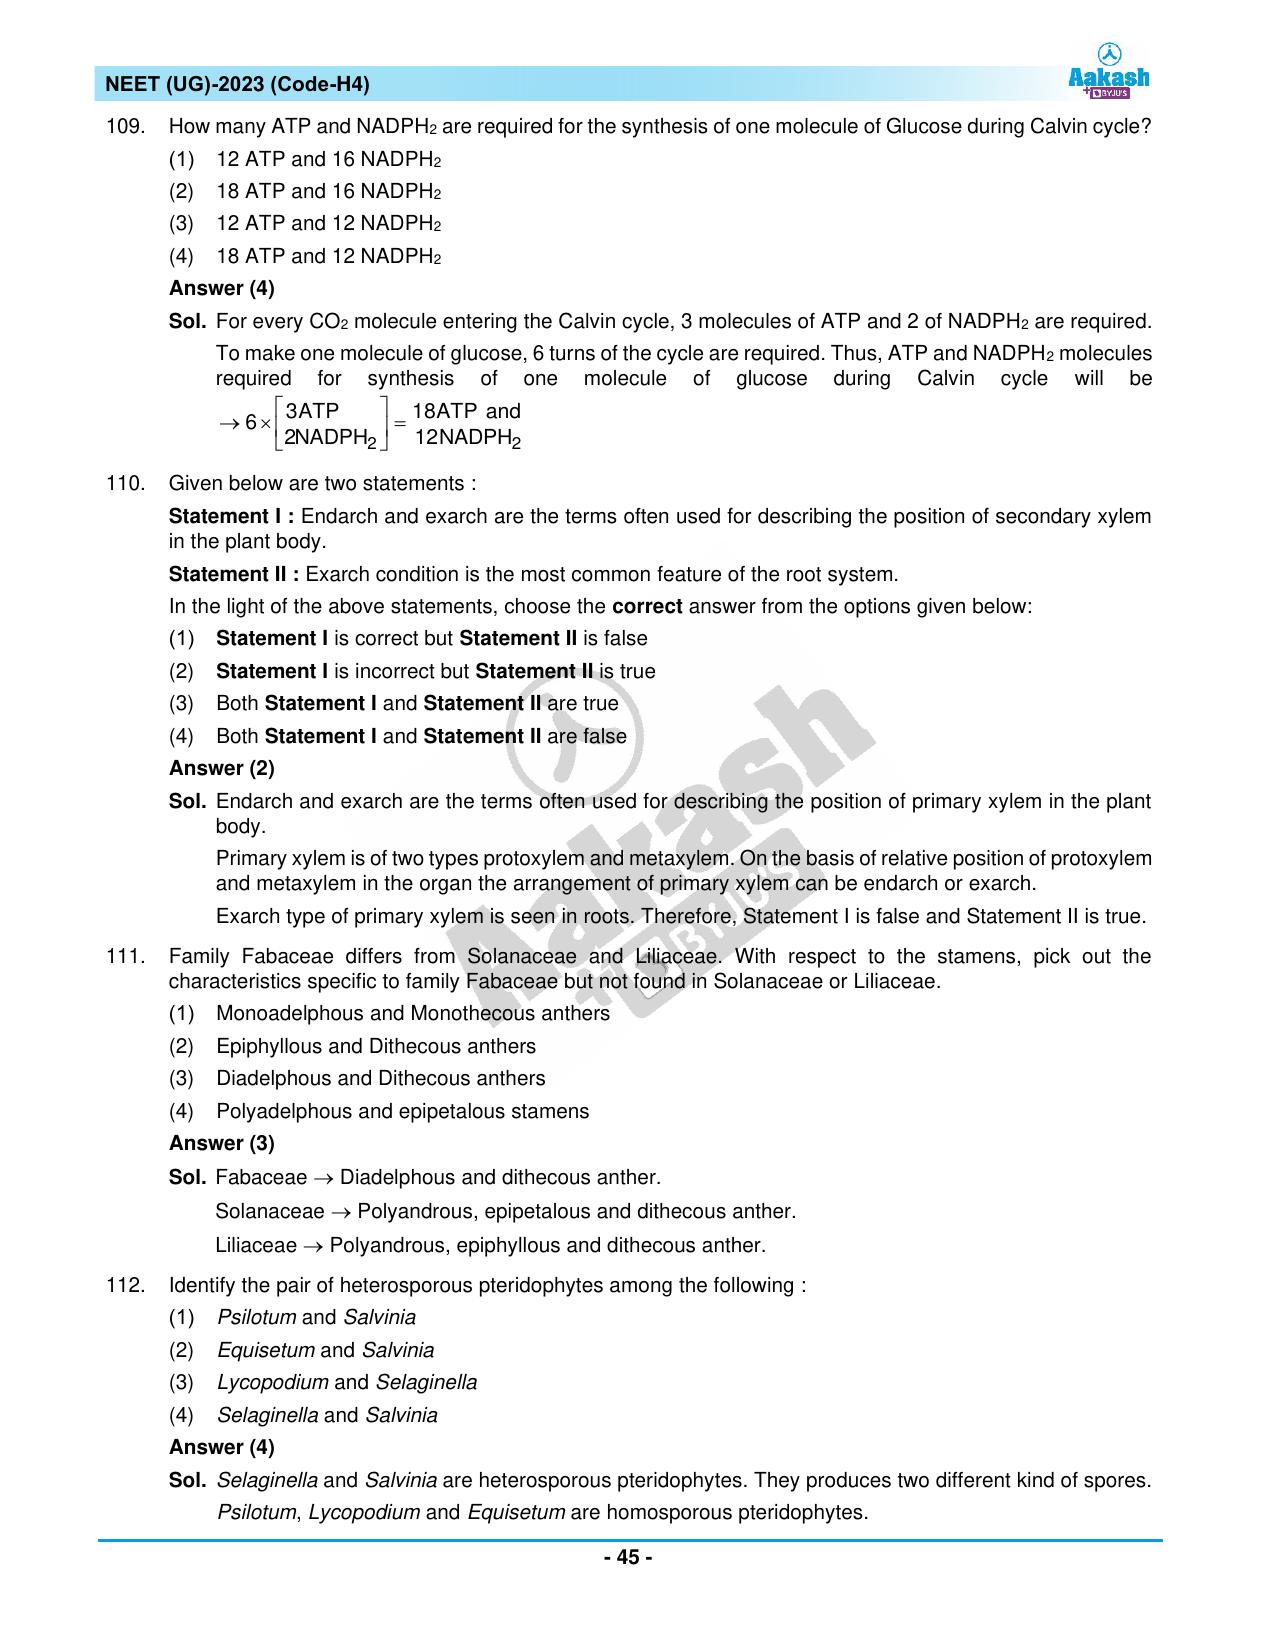 NEET 2023 Question Paper H4 - Page 45